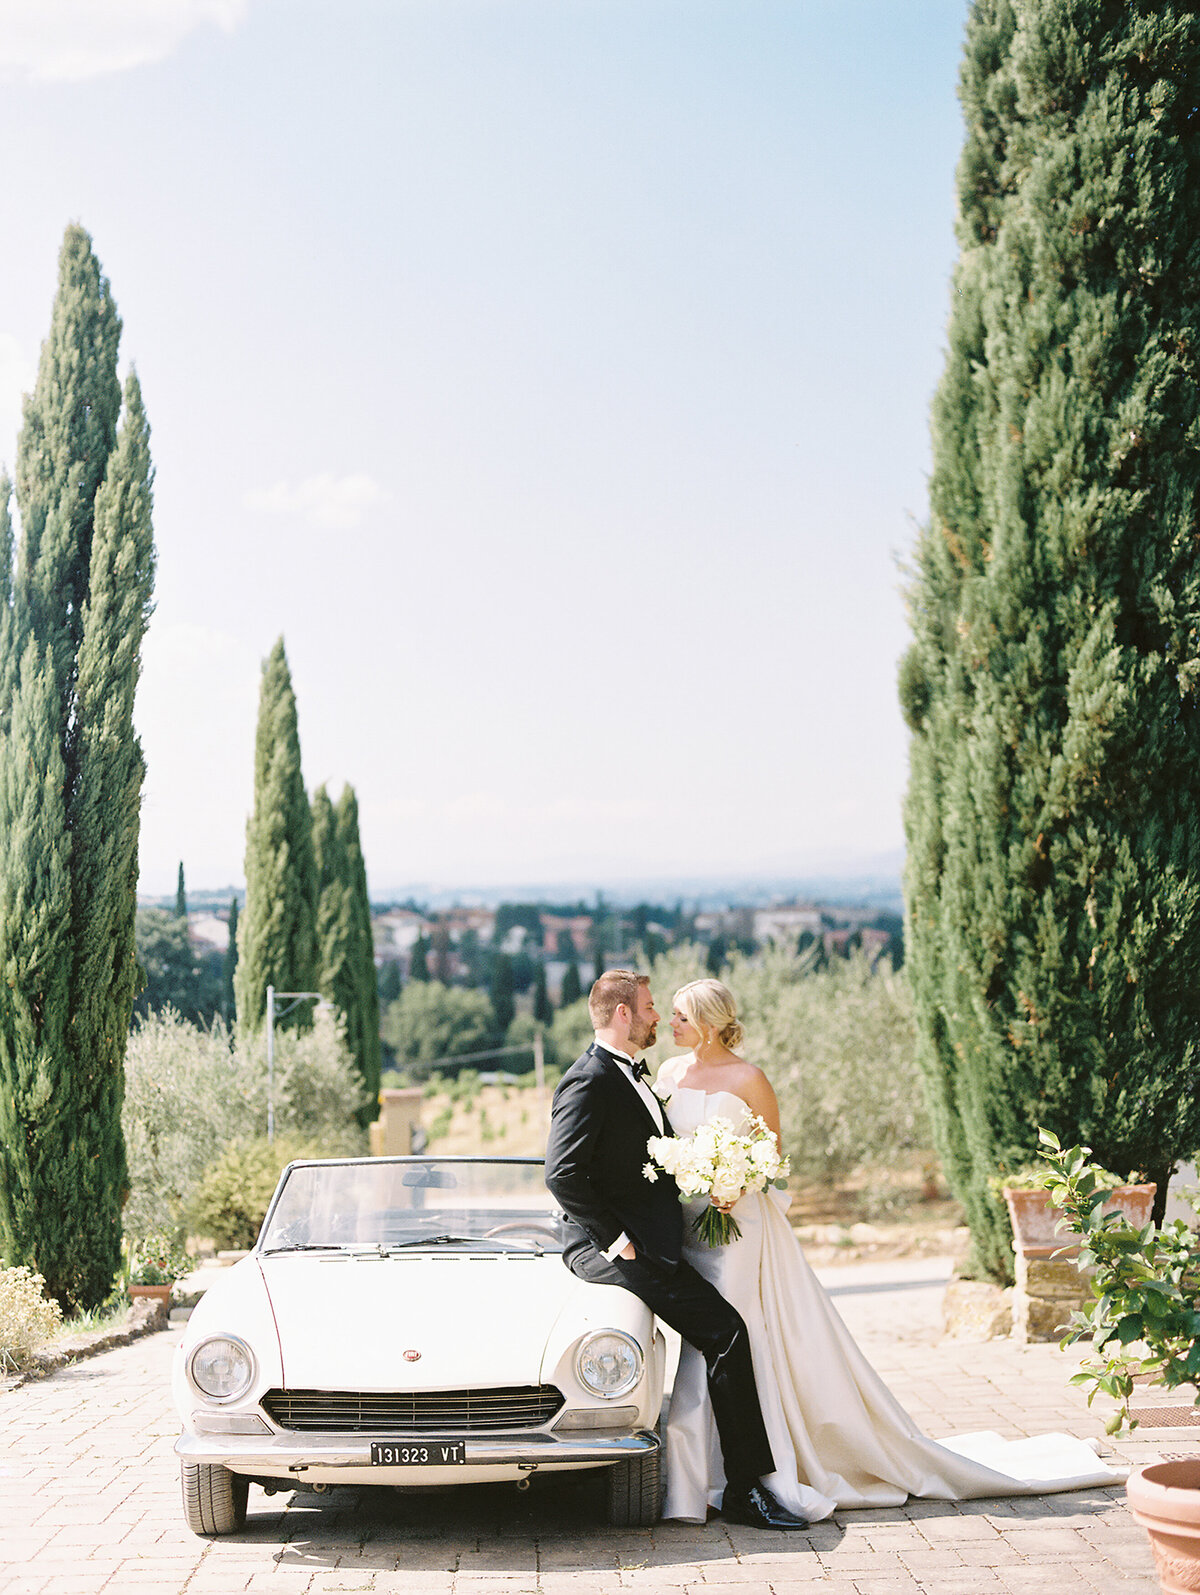 Bride and groom embracing and leaning on a car photographed by Chicago editorial wedding photographer Arielle Peters